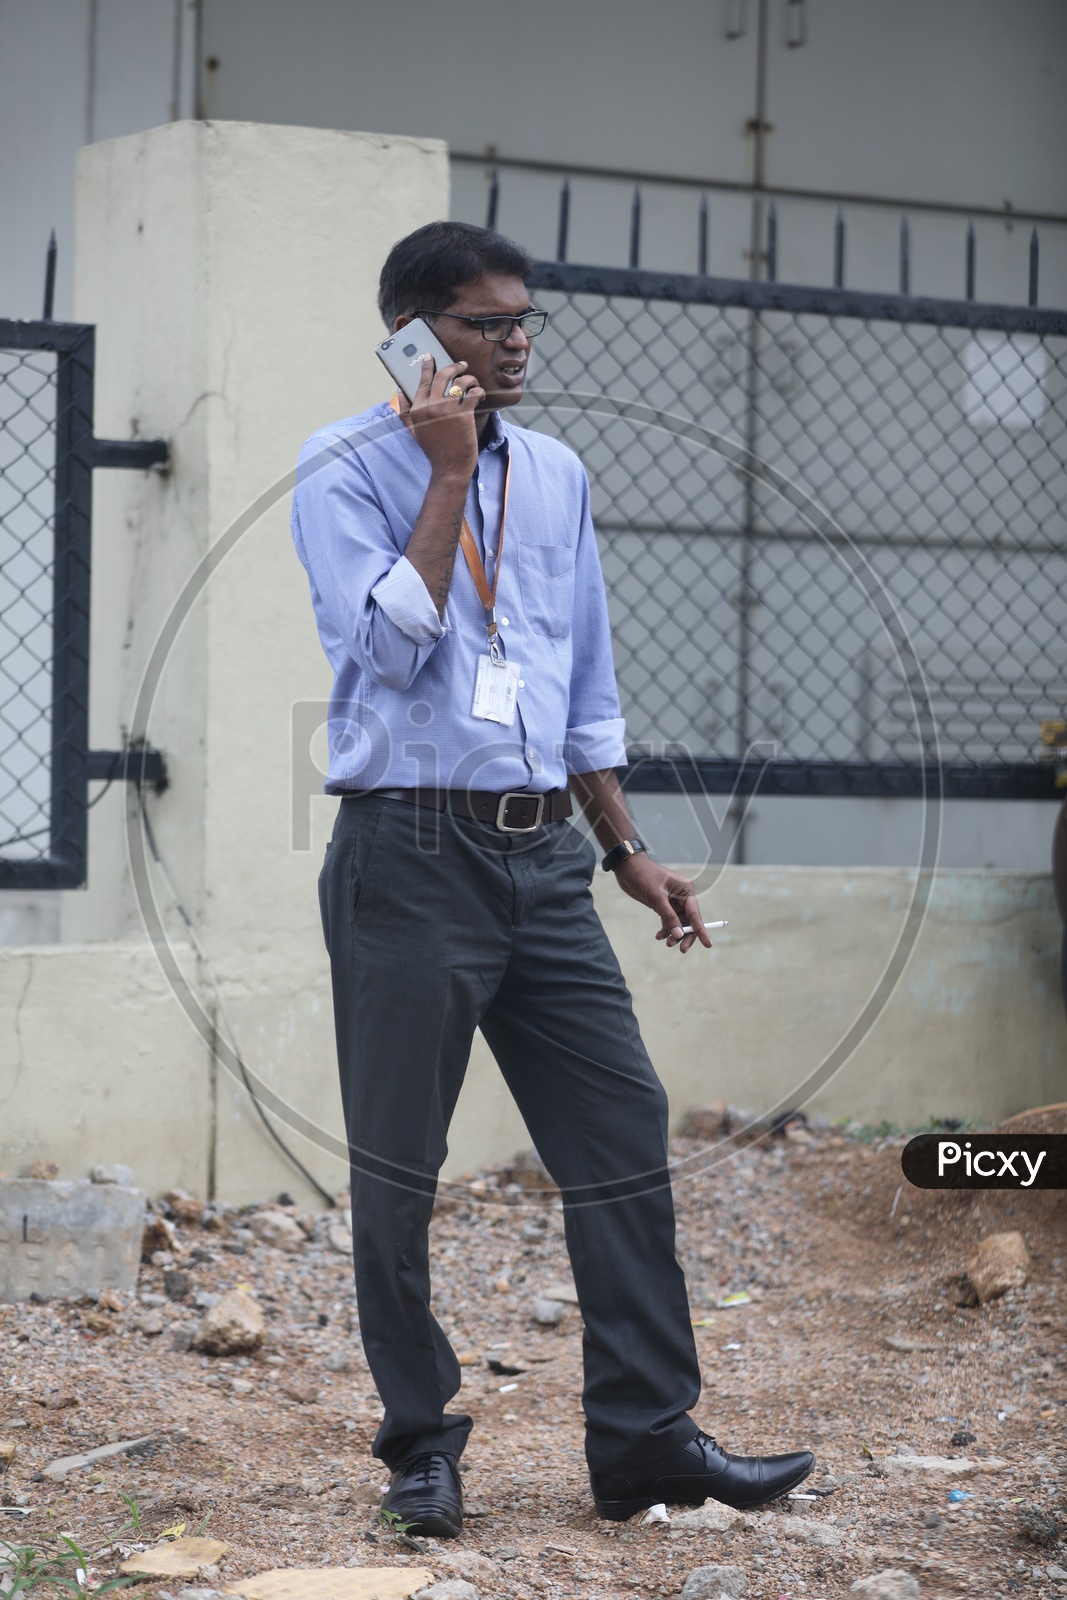 IT Employee Smoking Cigarette While Speaking in Mobile Phone